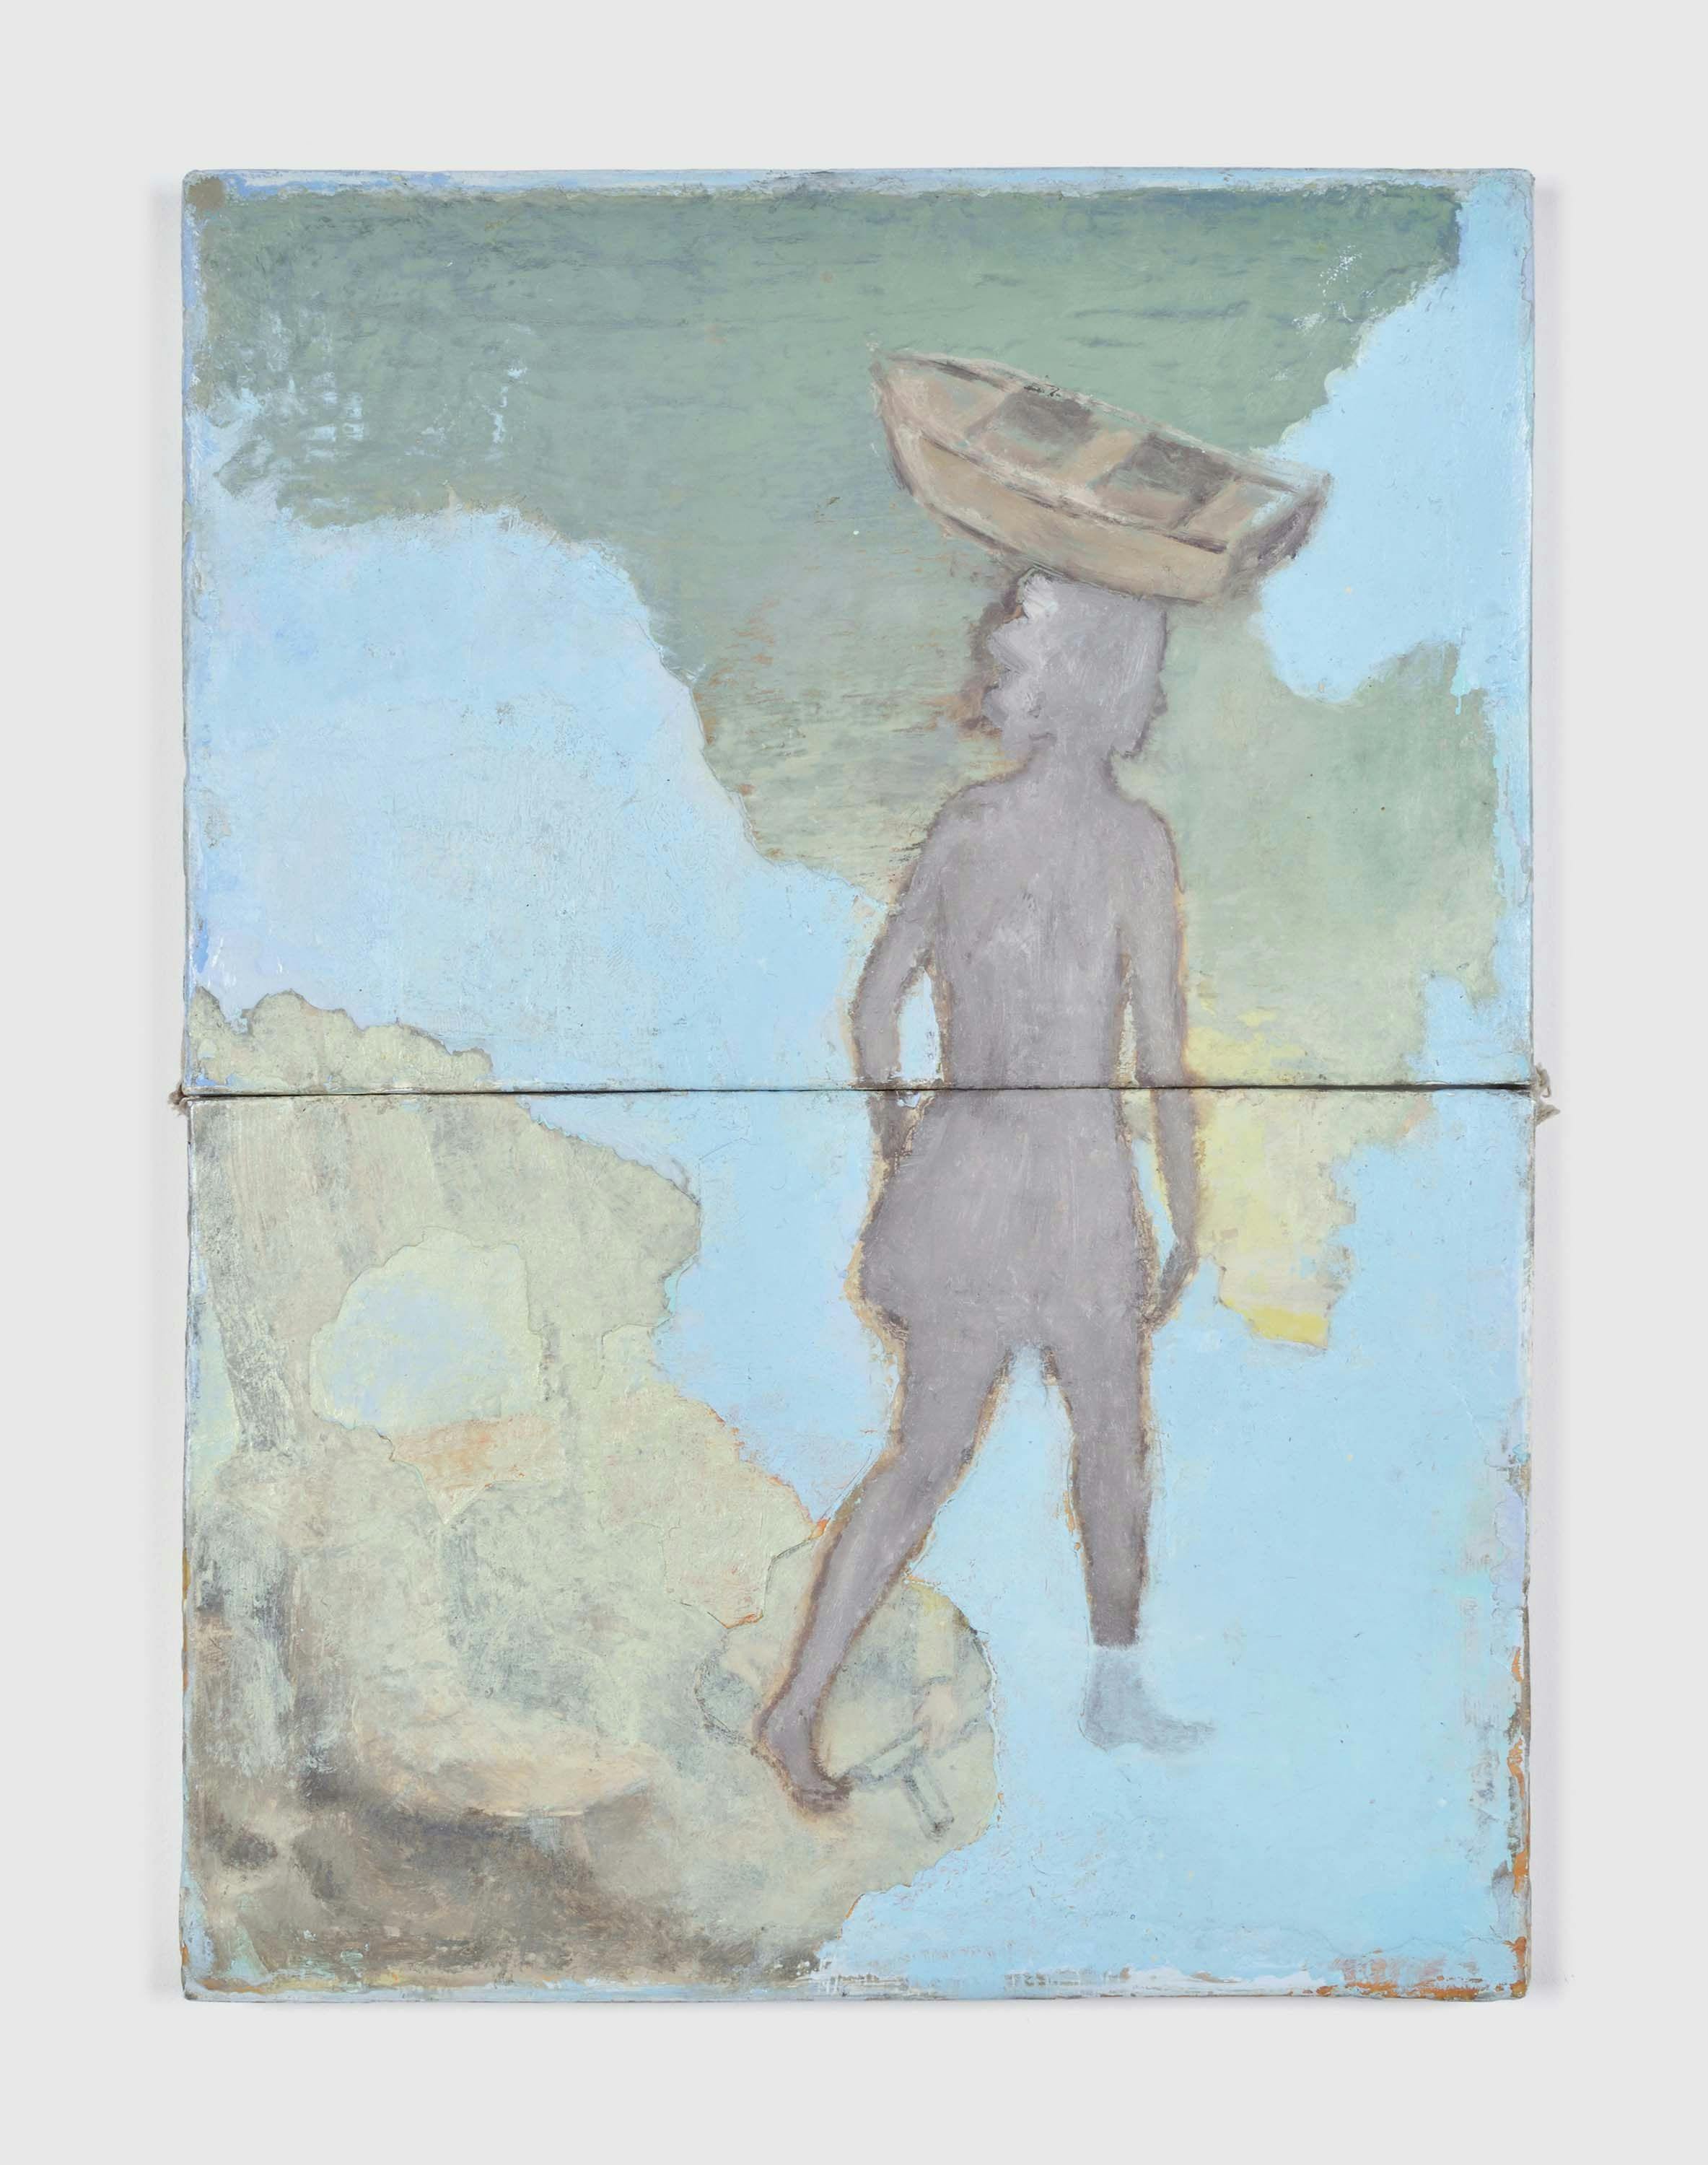 A painting by Francis Alÿs, called Untitled (Study for 'Don't Cross the Bridge Before You Get to the River'), 2006 to 2008.